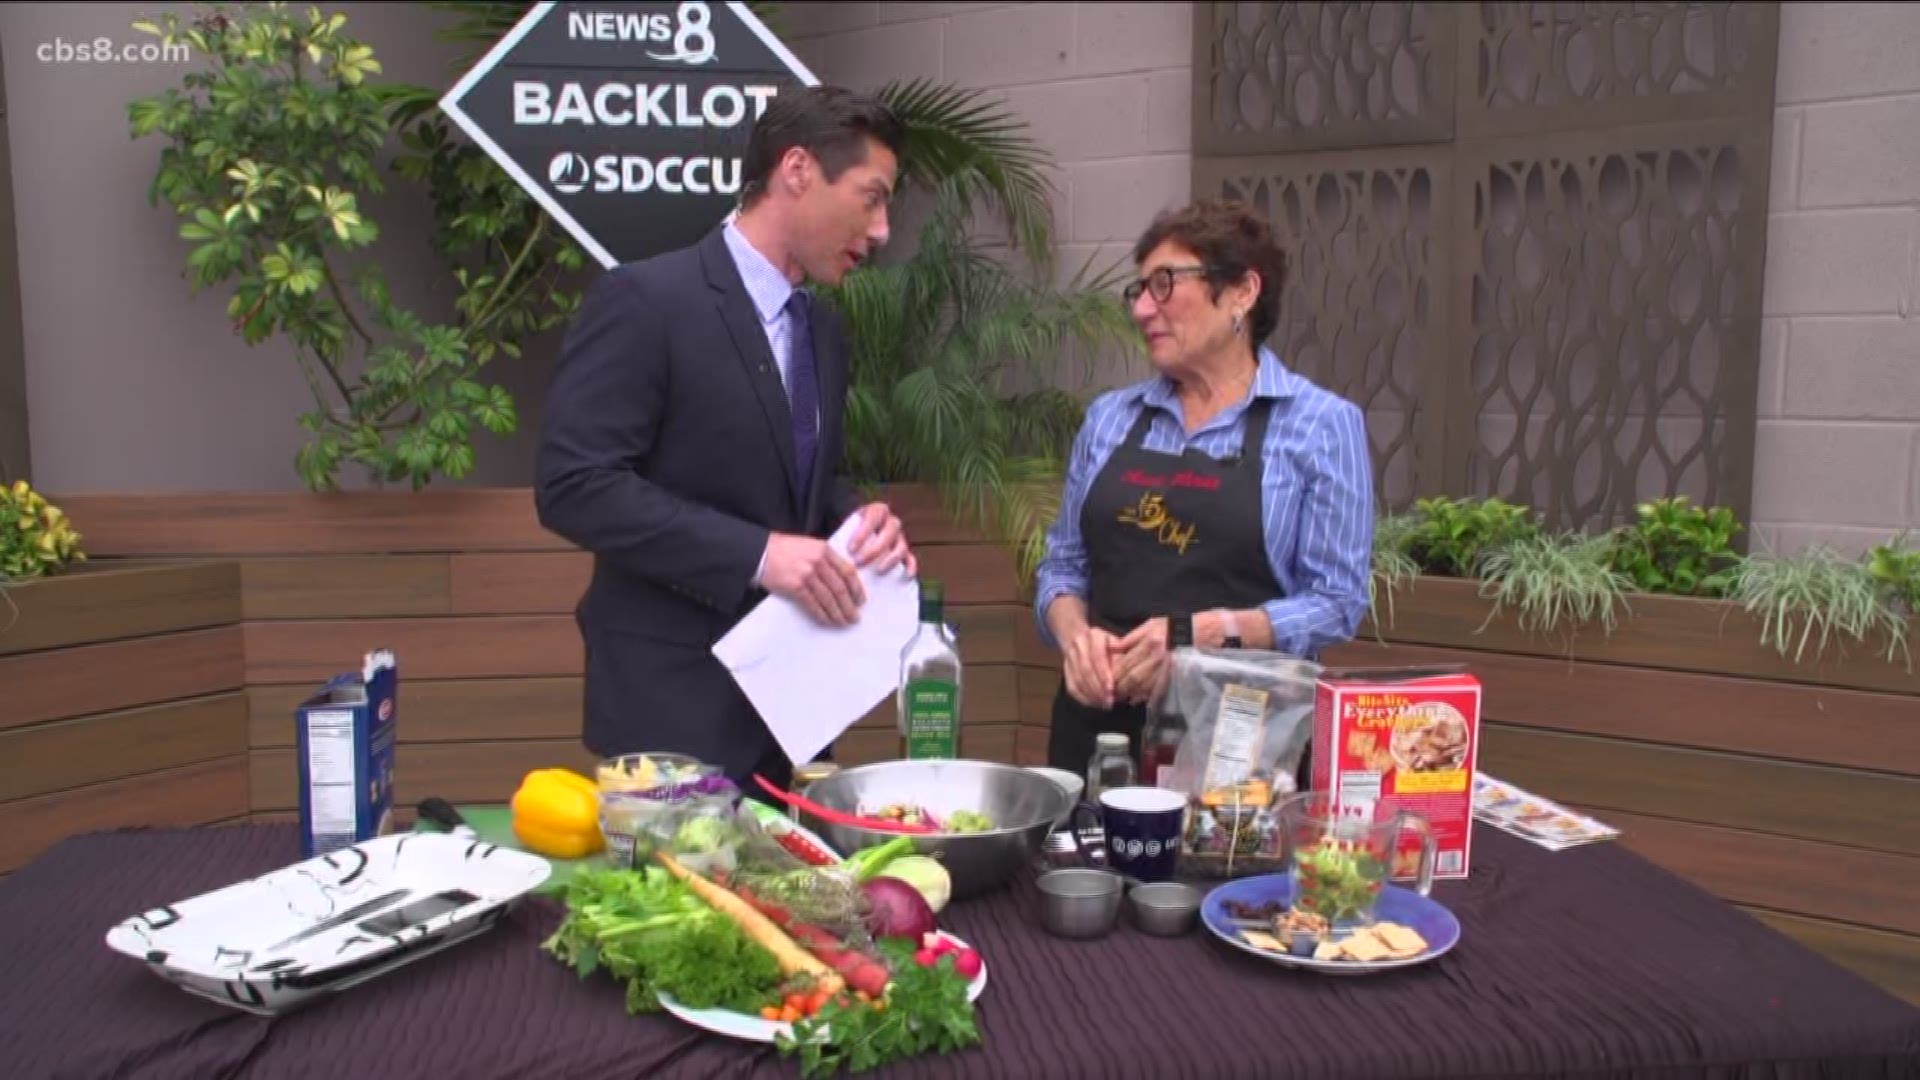 It’s America saves week and $5 chef Marcie Rothman helps with both.